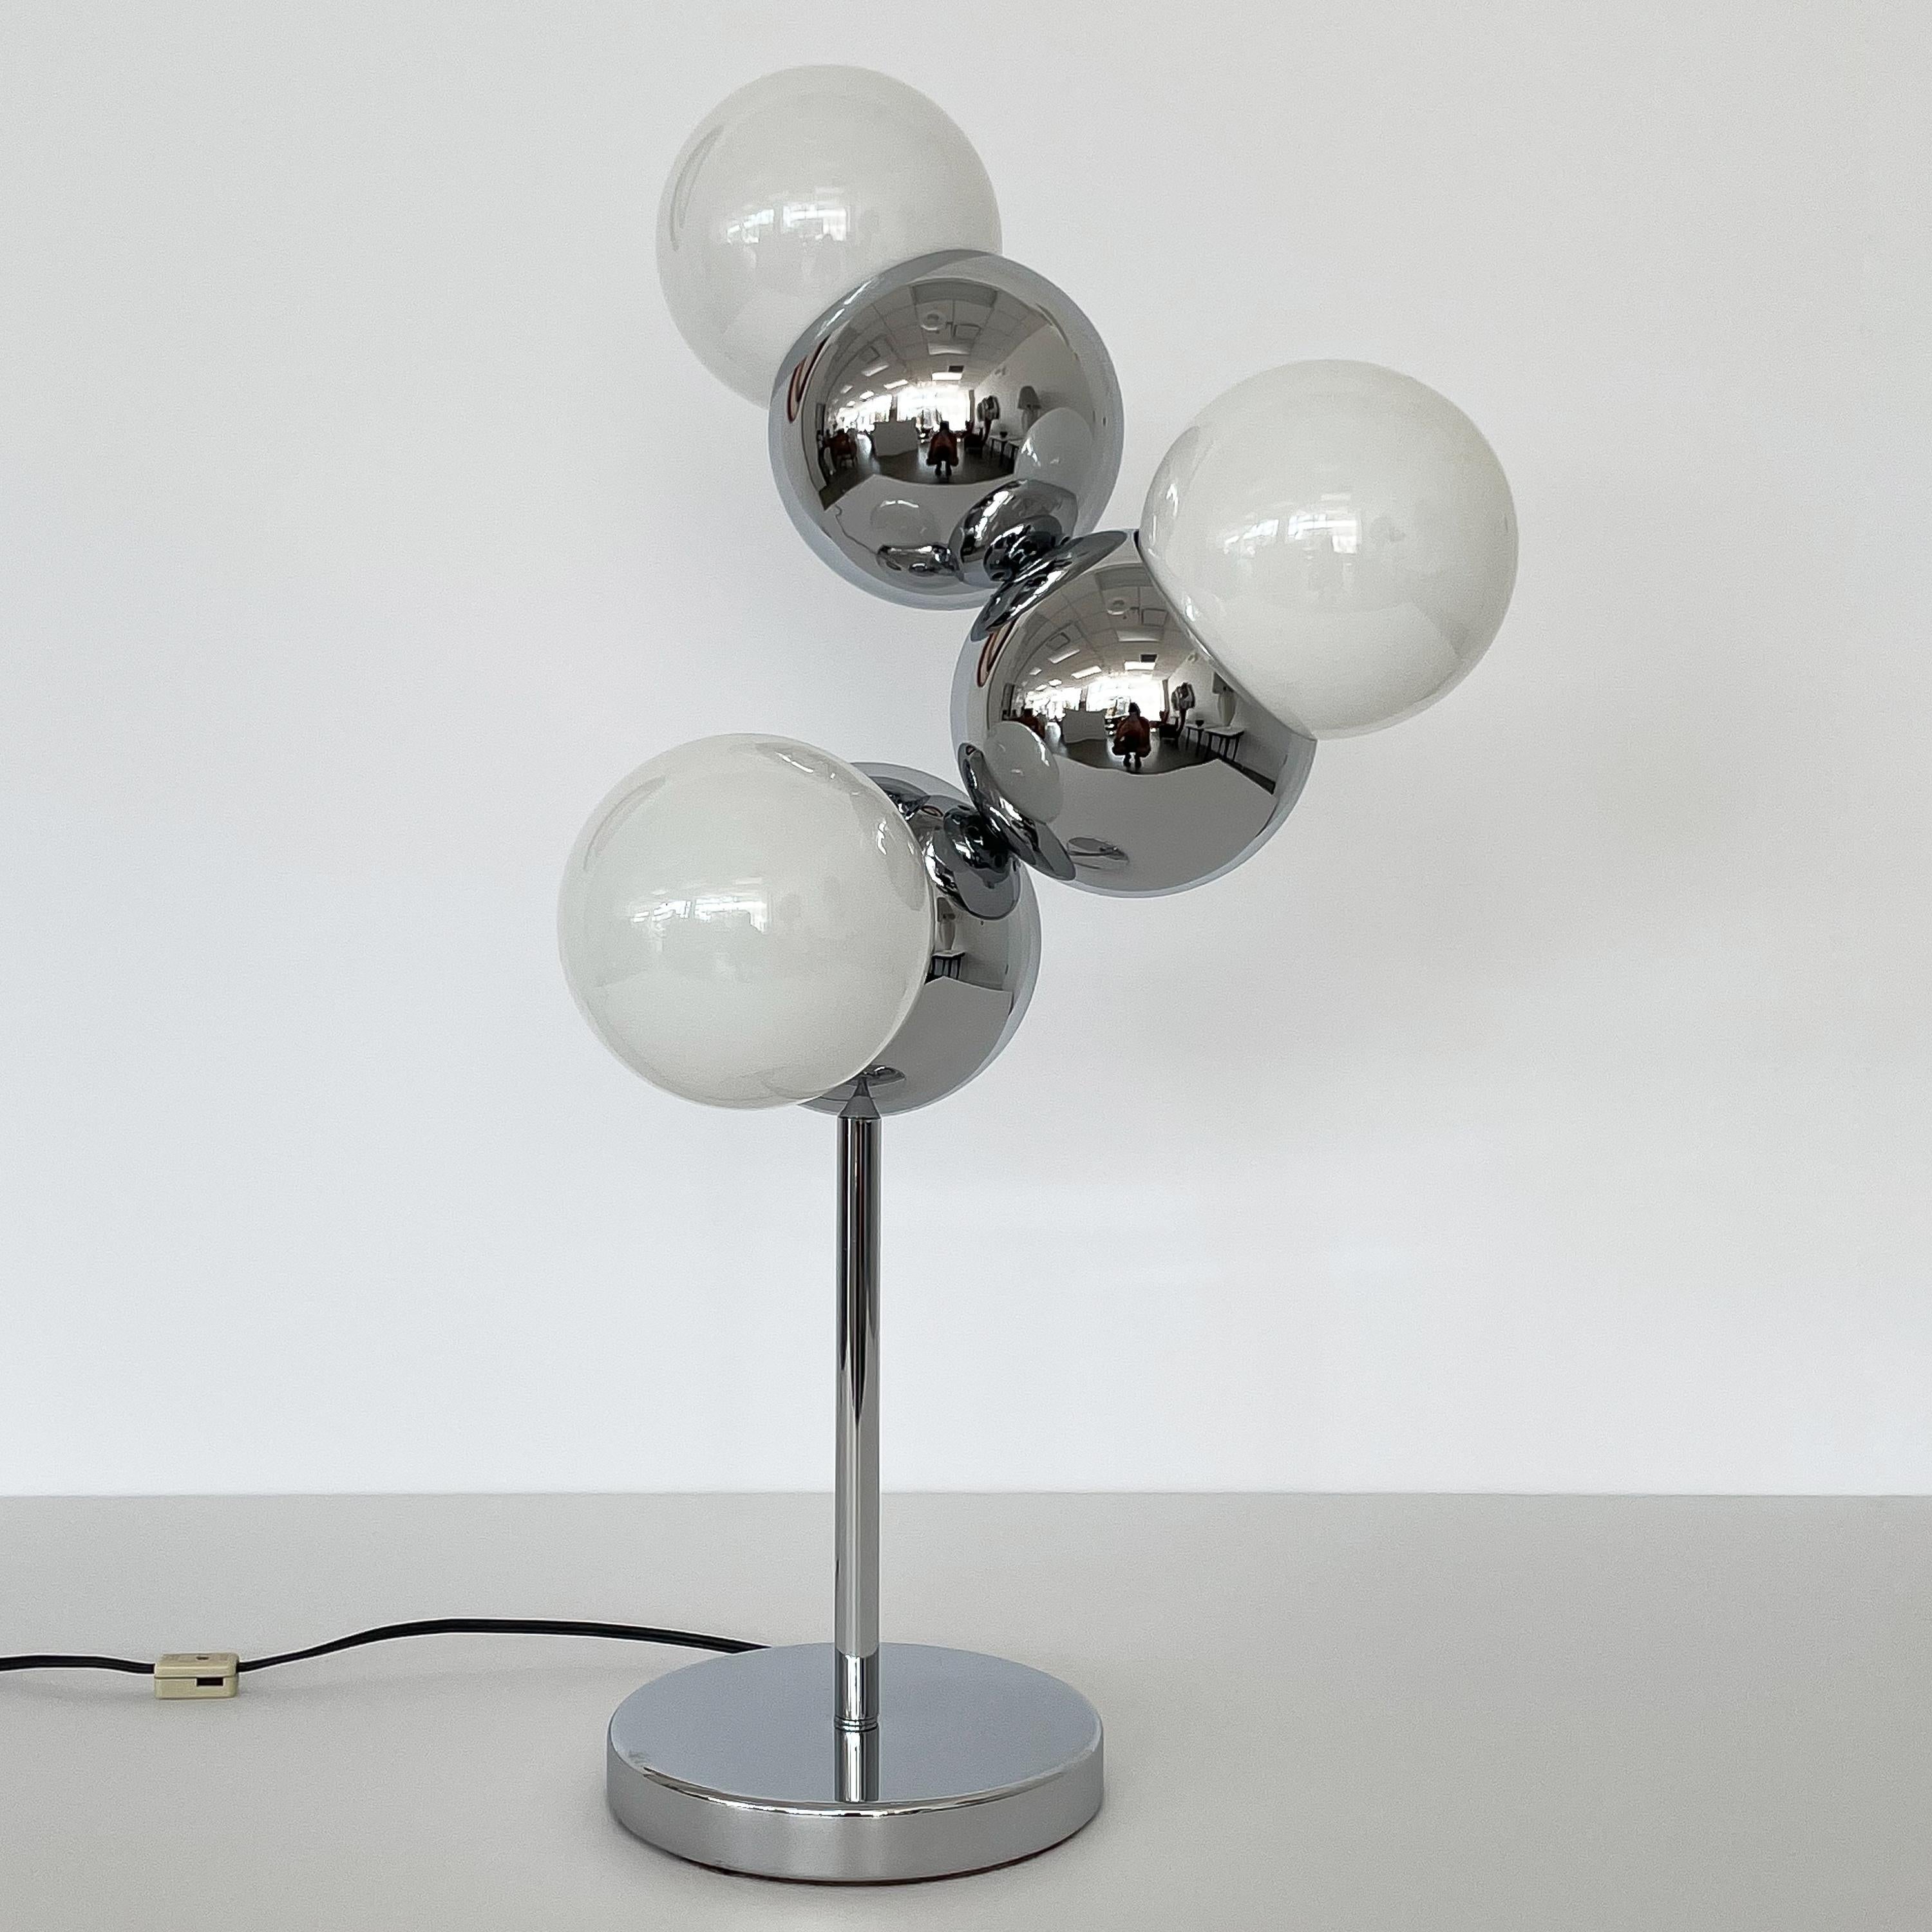 A Mid-Century Modern chrome molecule / eyeball table lamp by Robert Sonneman, circa 1960s. This lamp features three chrome eyeball spheres linked together and each housing a socket to accommodate a G40 globe light bulb. The addition of the light